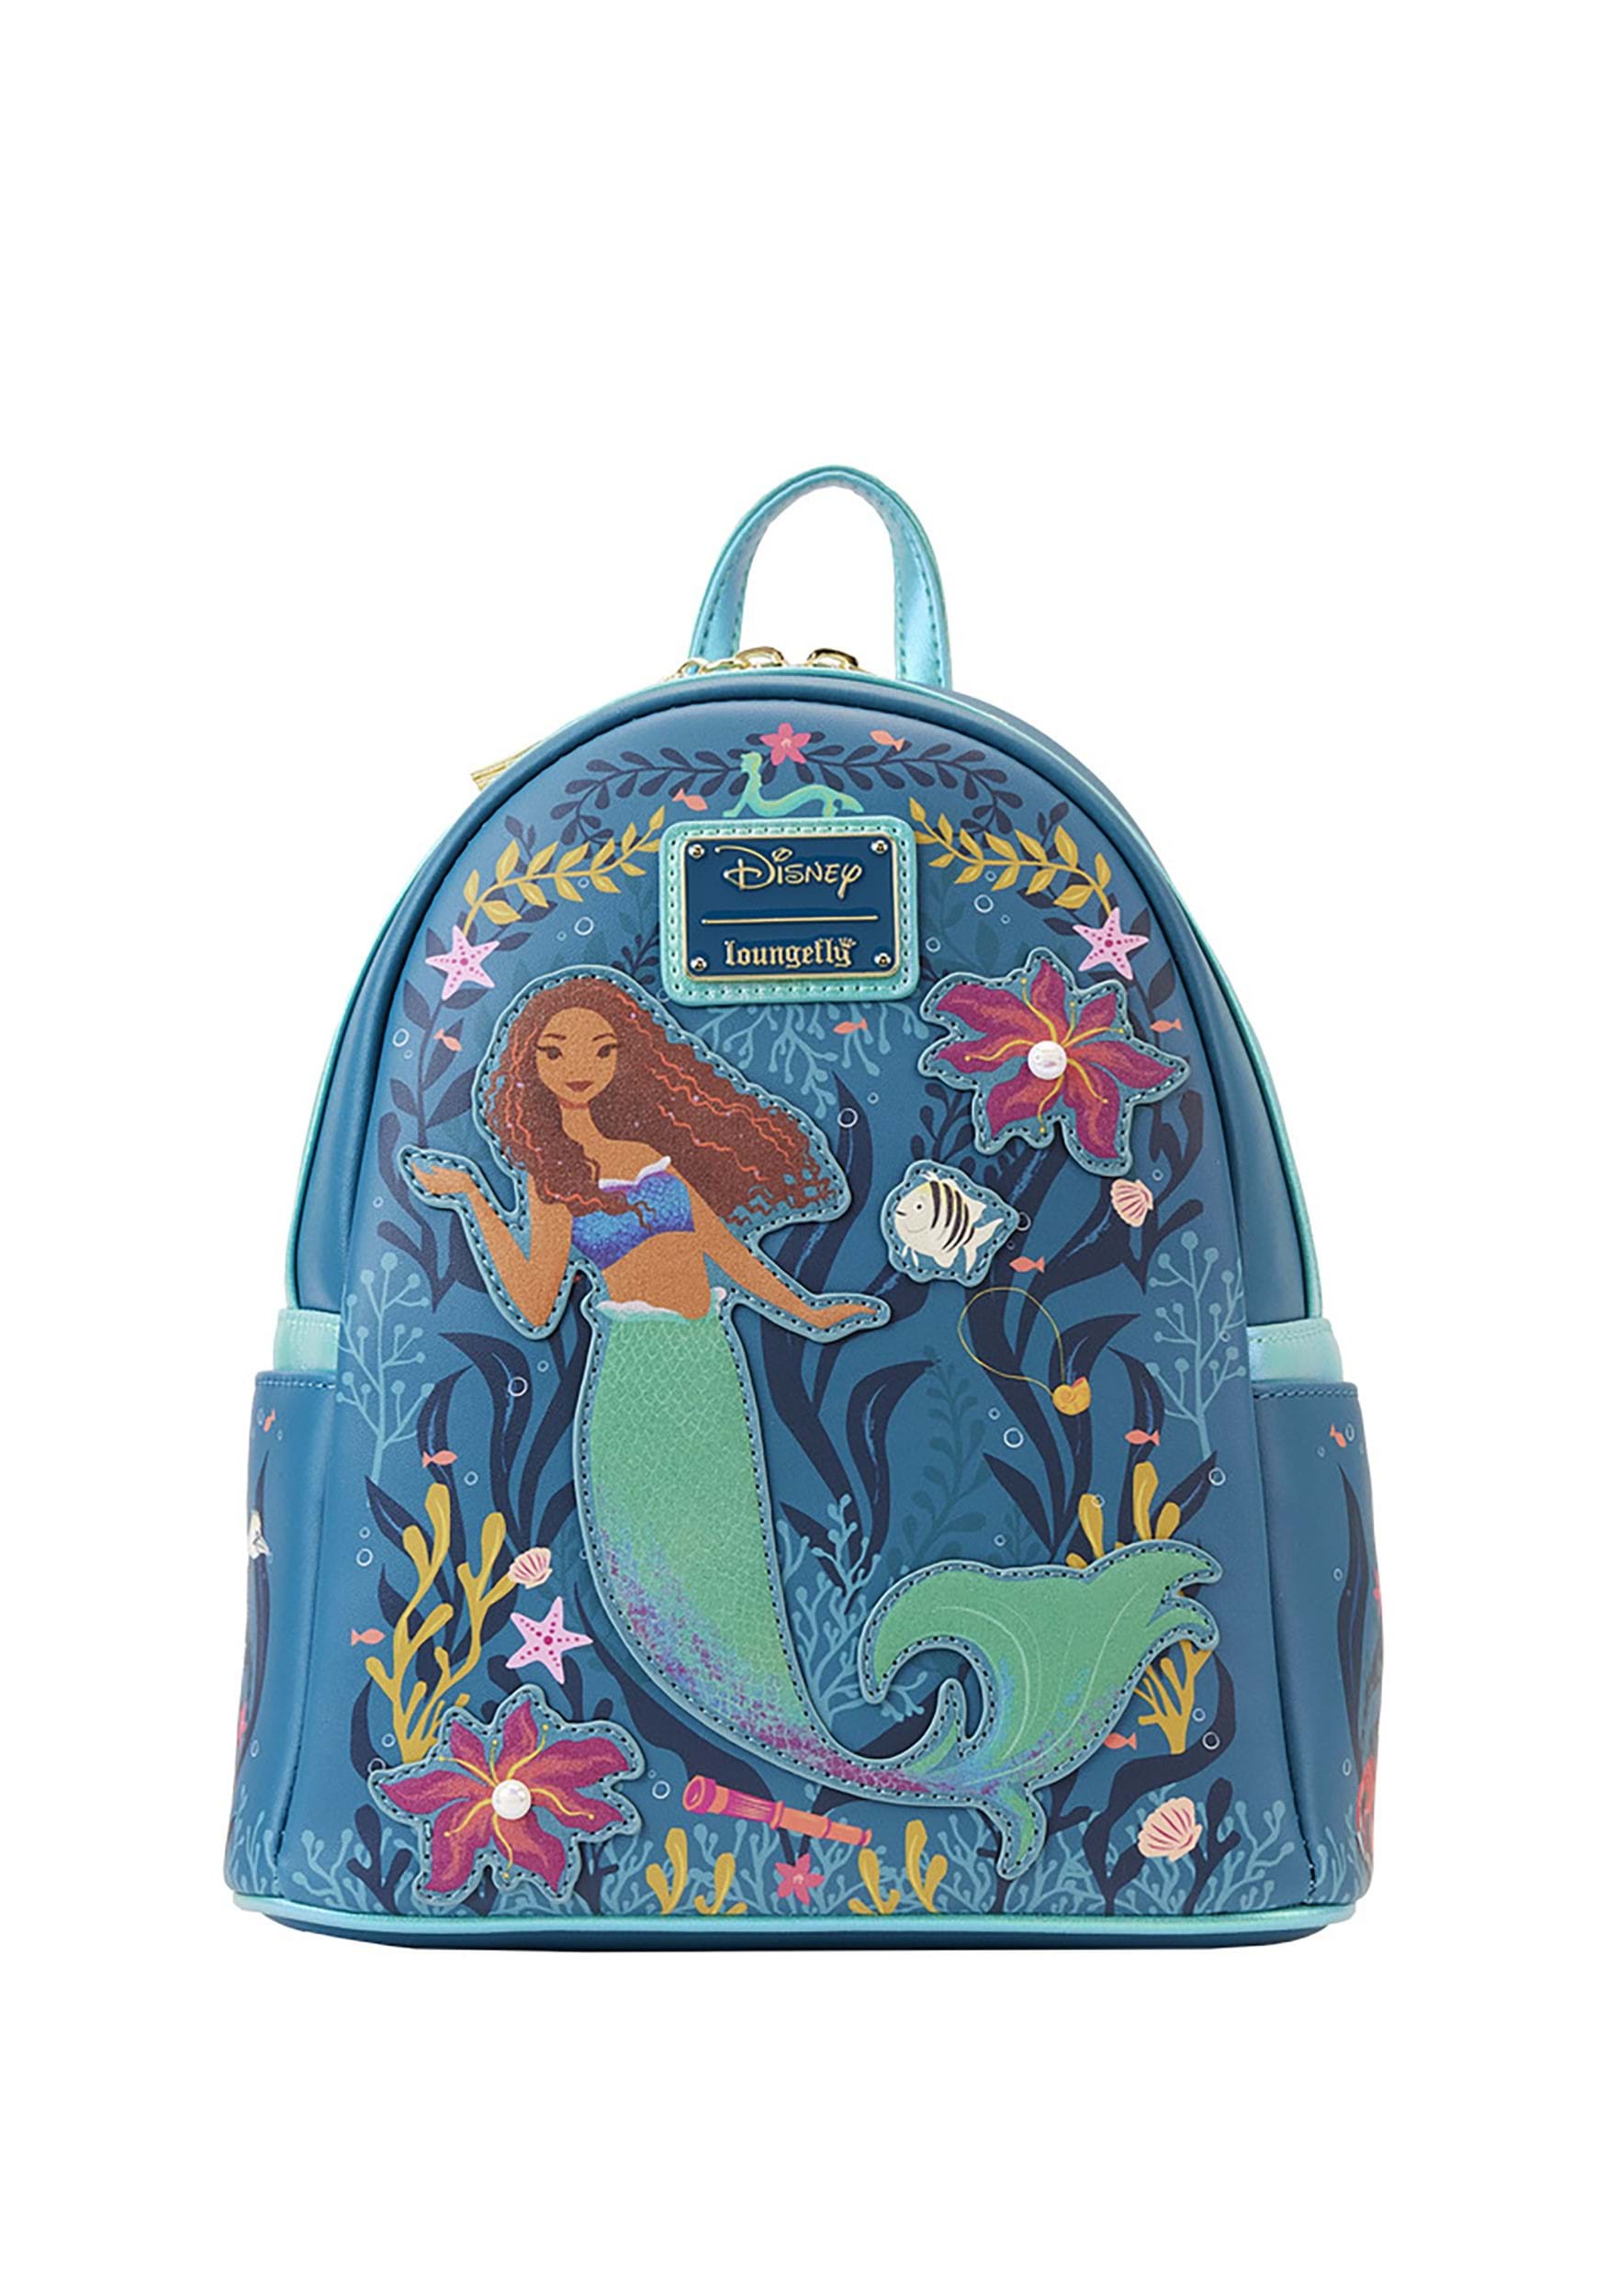 Loungefly The Little Mermaid Ariel Live Action Loungefly Mini Backpack